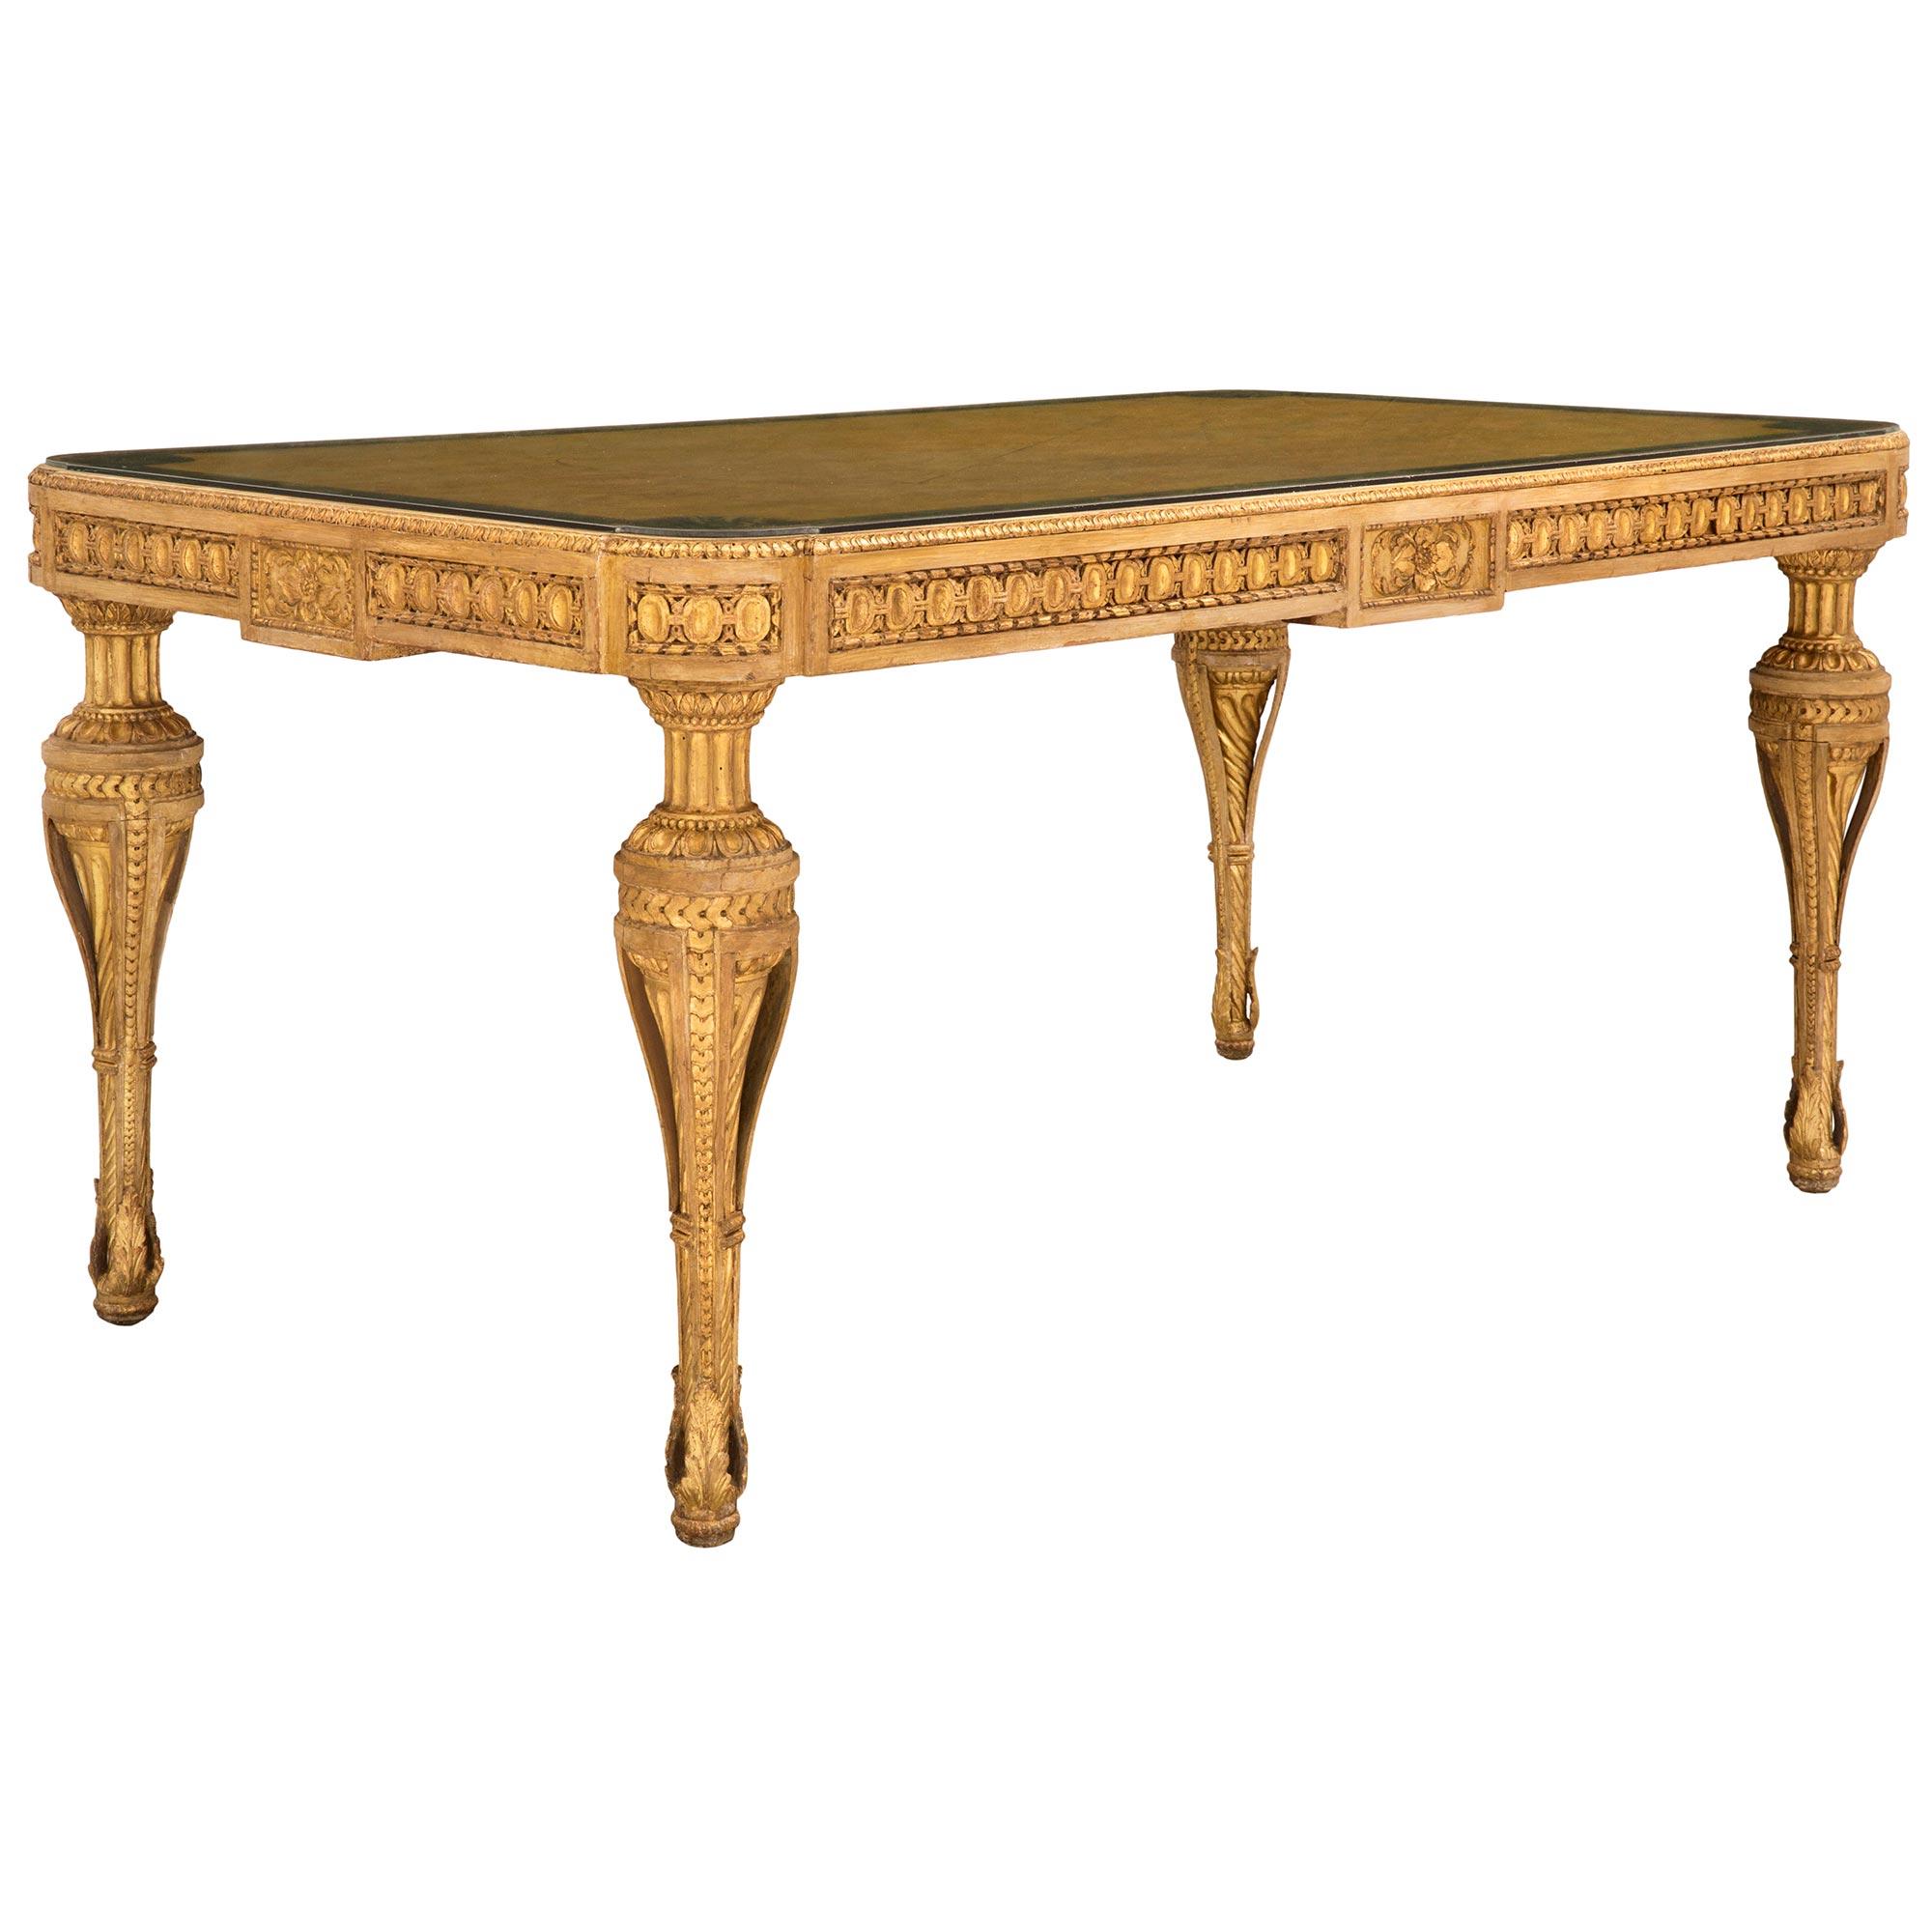 Italian 19th Century Louis XVI Style Patinated and Giltwood Center/Dining Table In Good Condition For Sale In West Palm Beach, FL